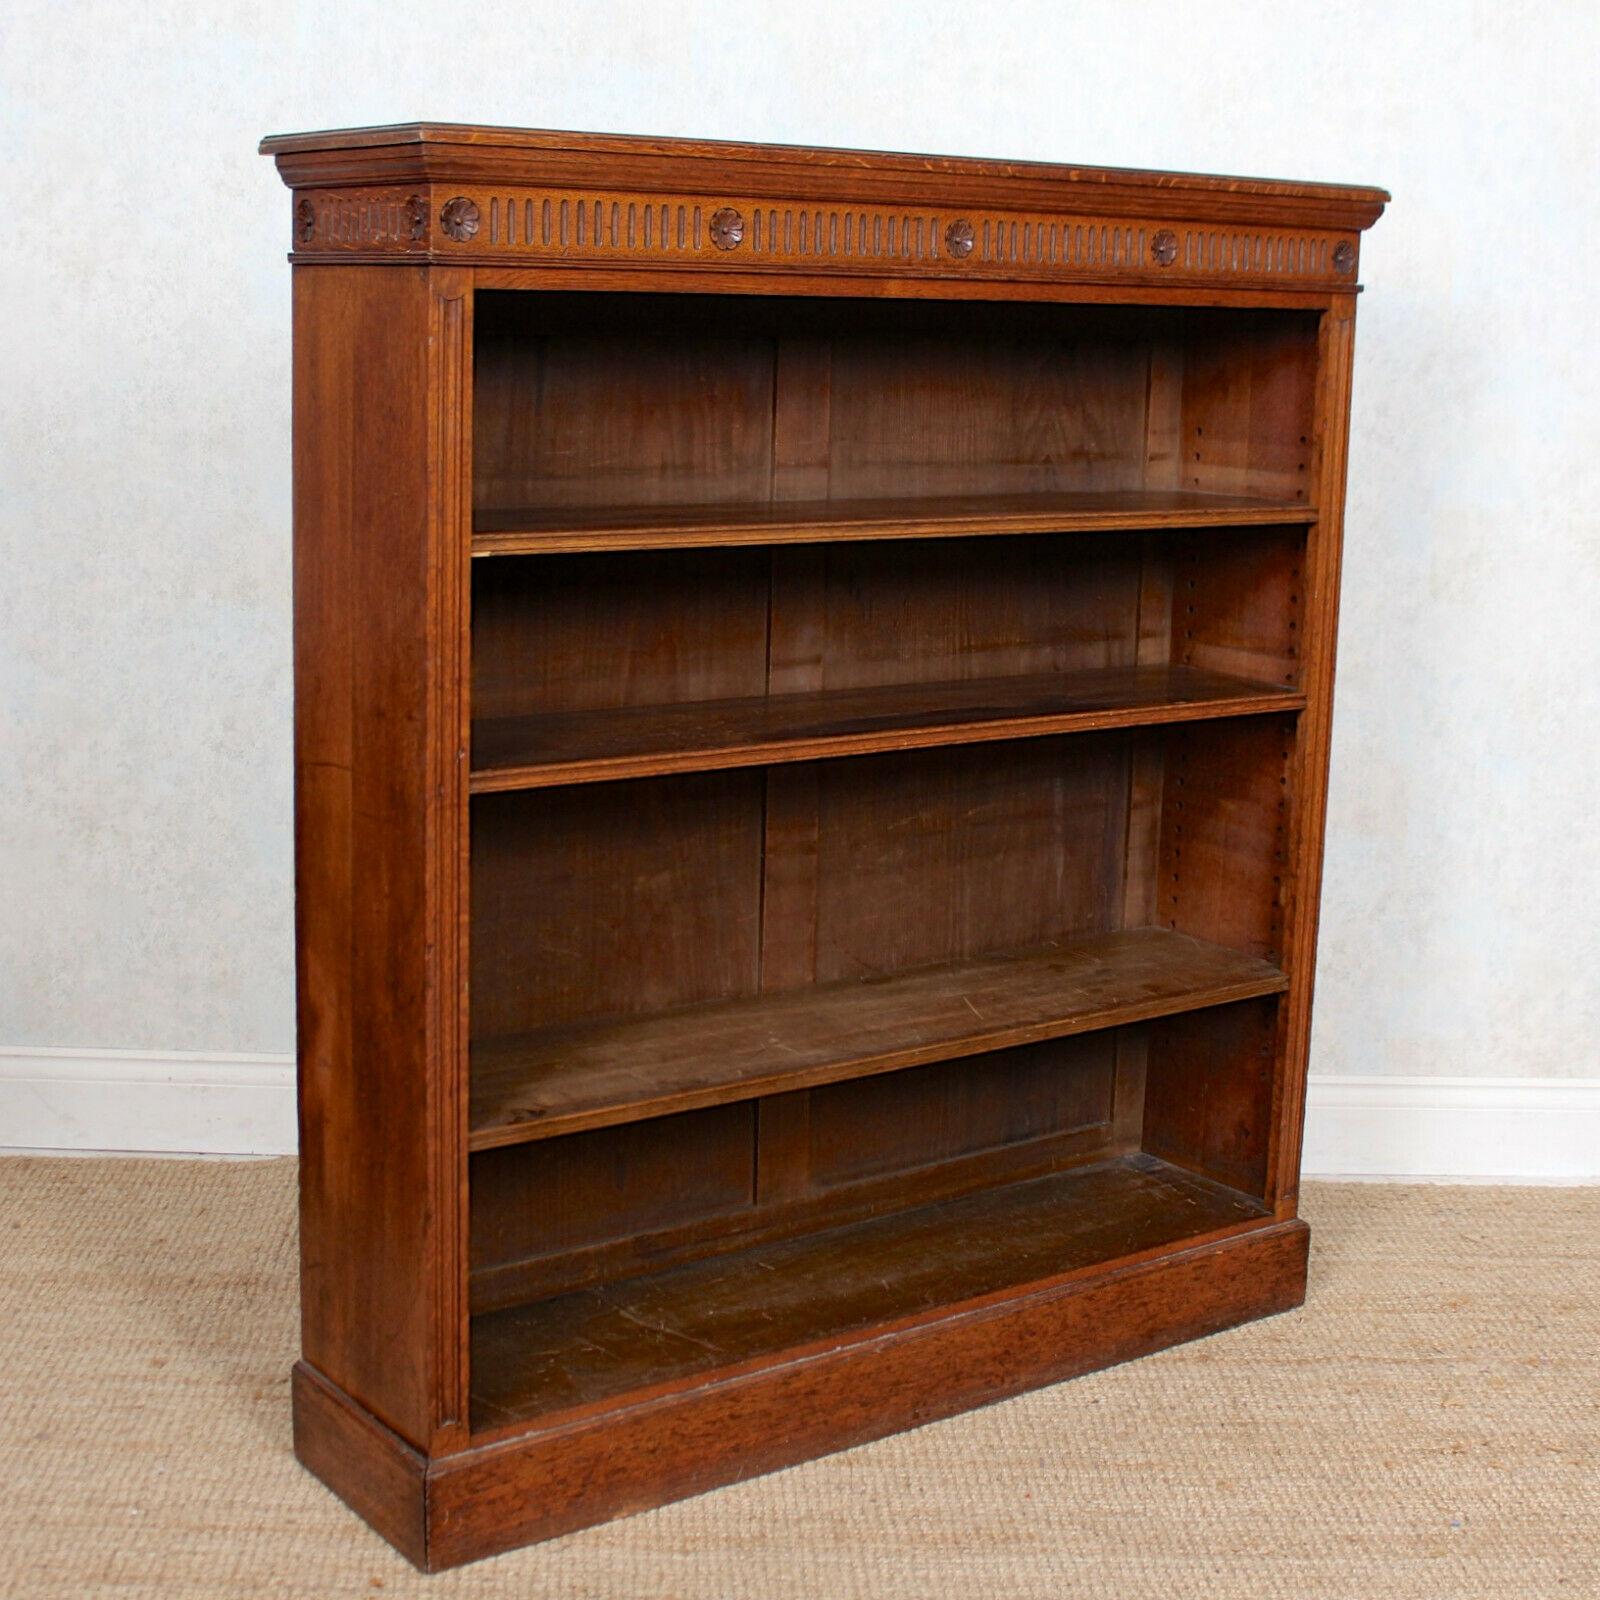 Early 20th Century English Edwardian Oak Open Bookcase Carved Library Bookshelves Solid